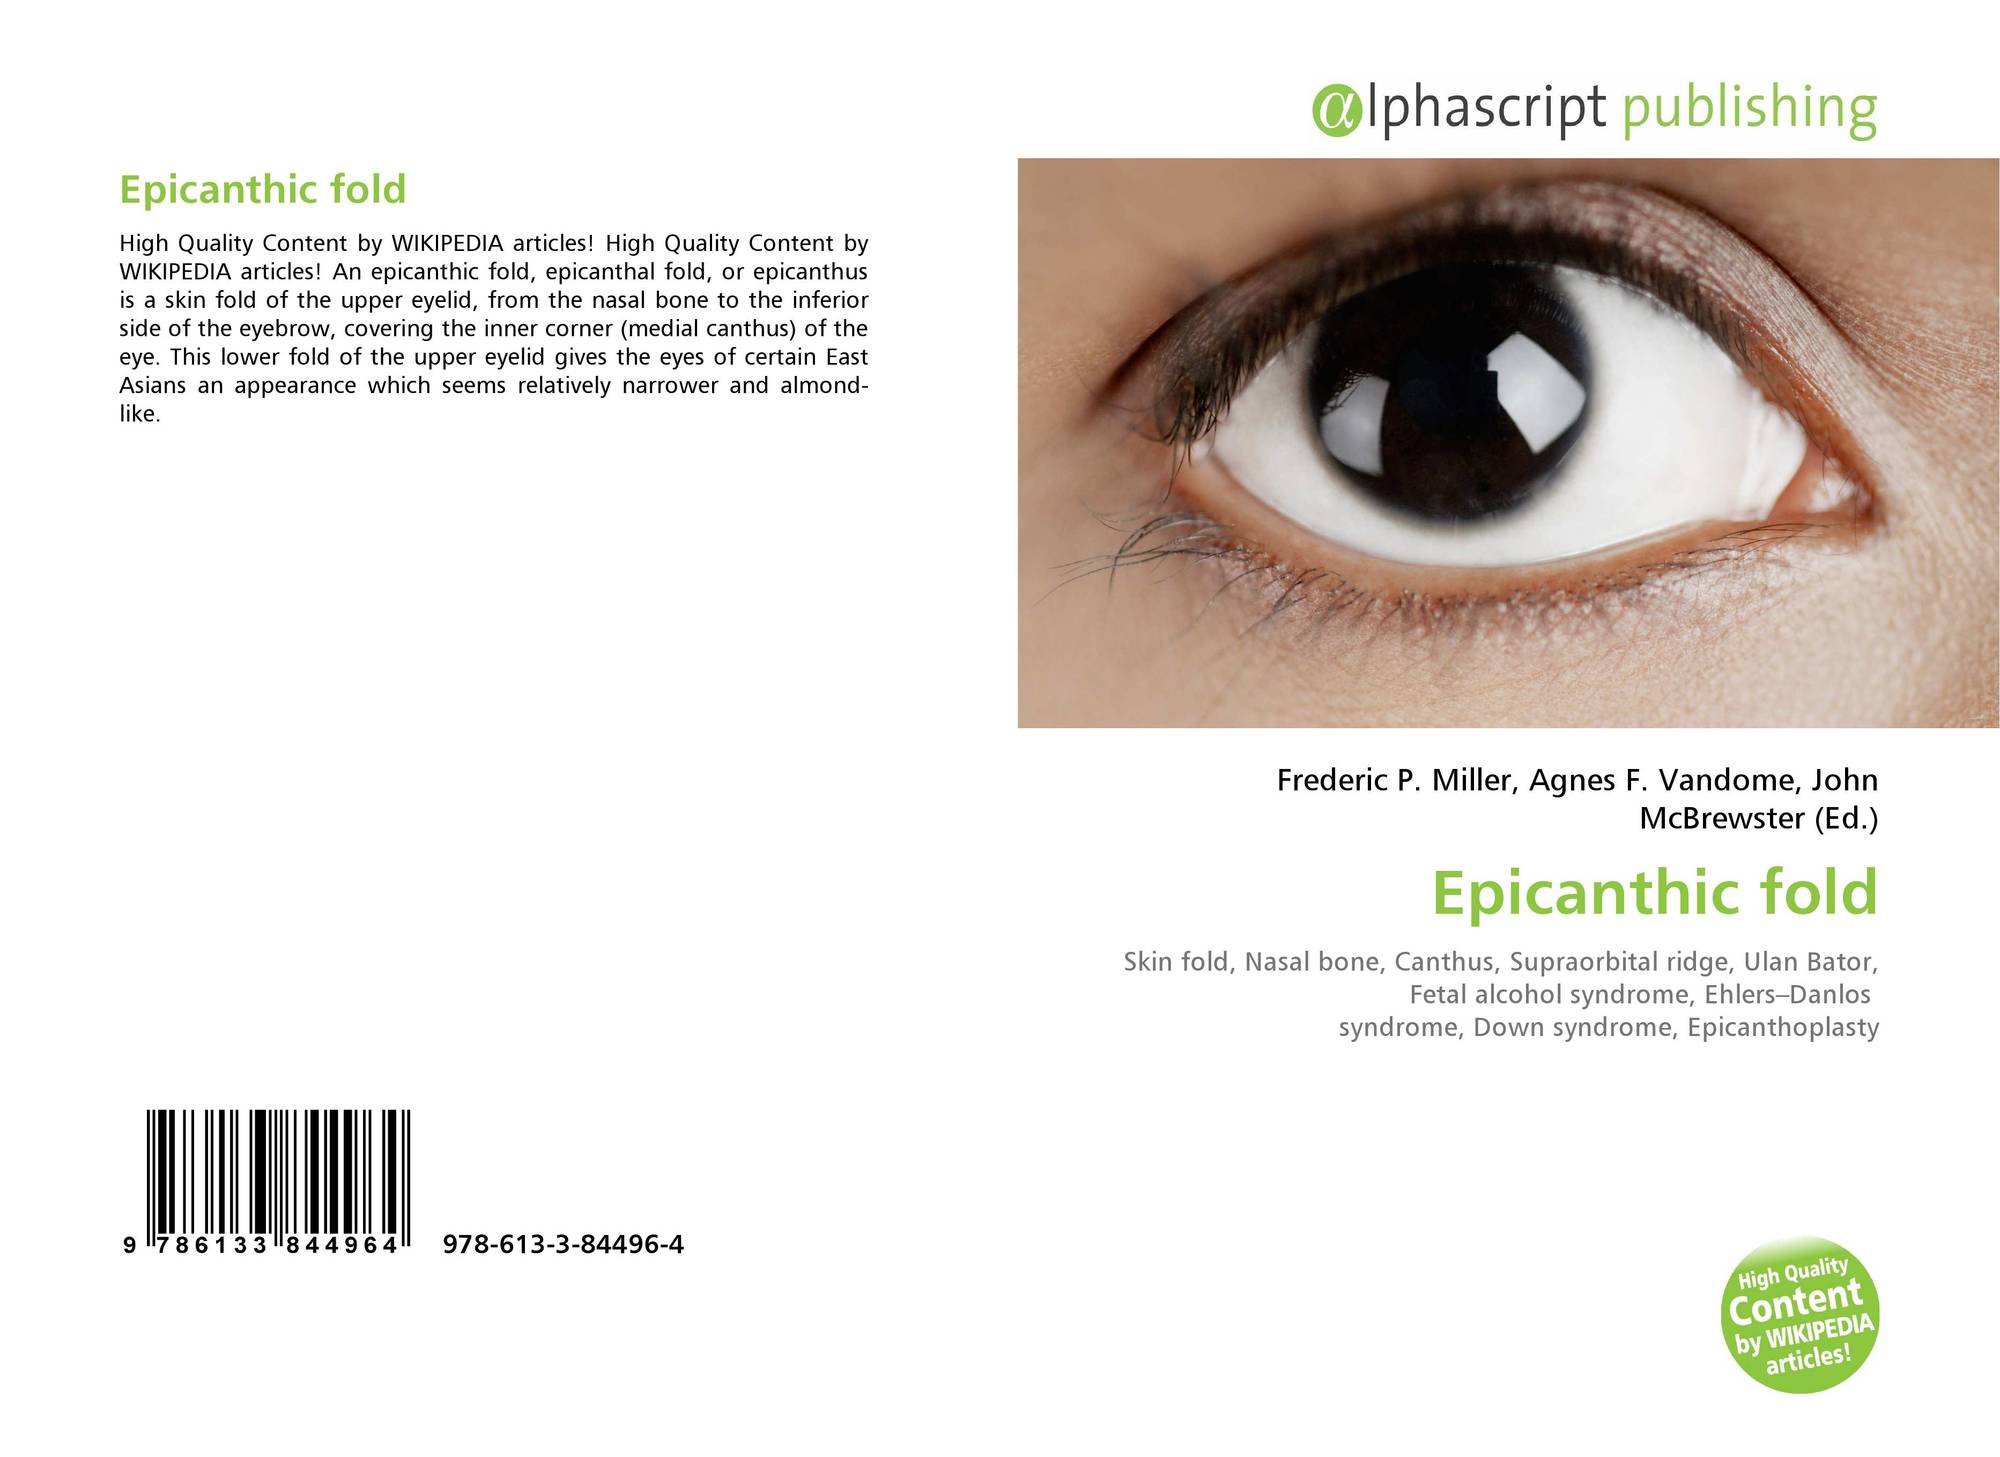 Epicanthic Fold 978 613 3 84496 4 6133844965 9786133844964